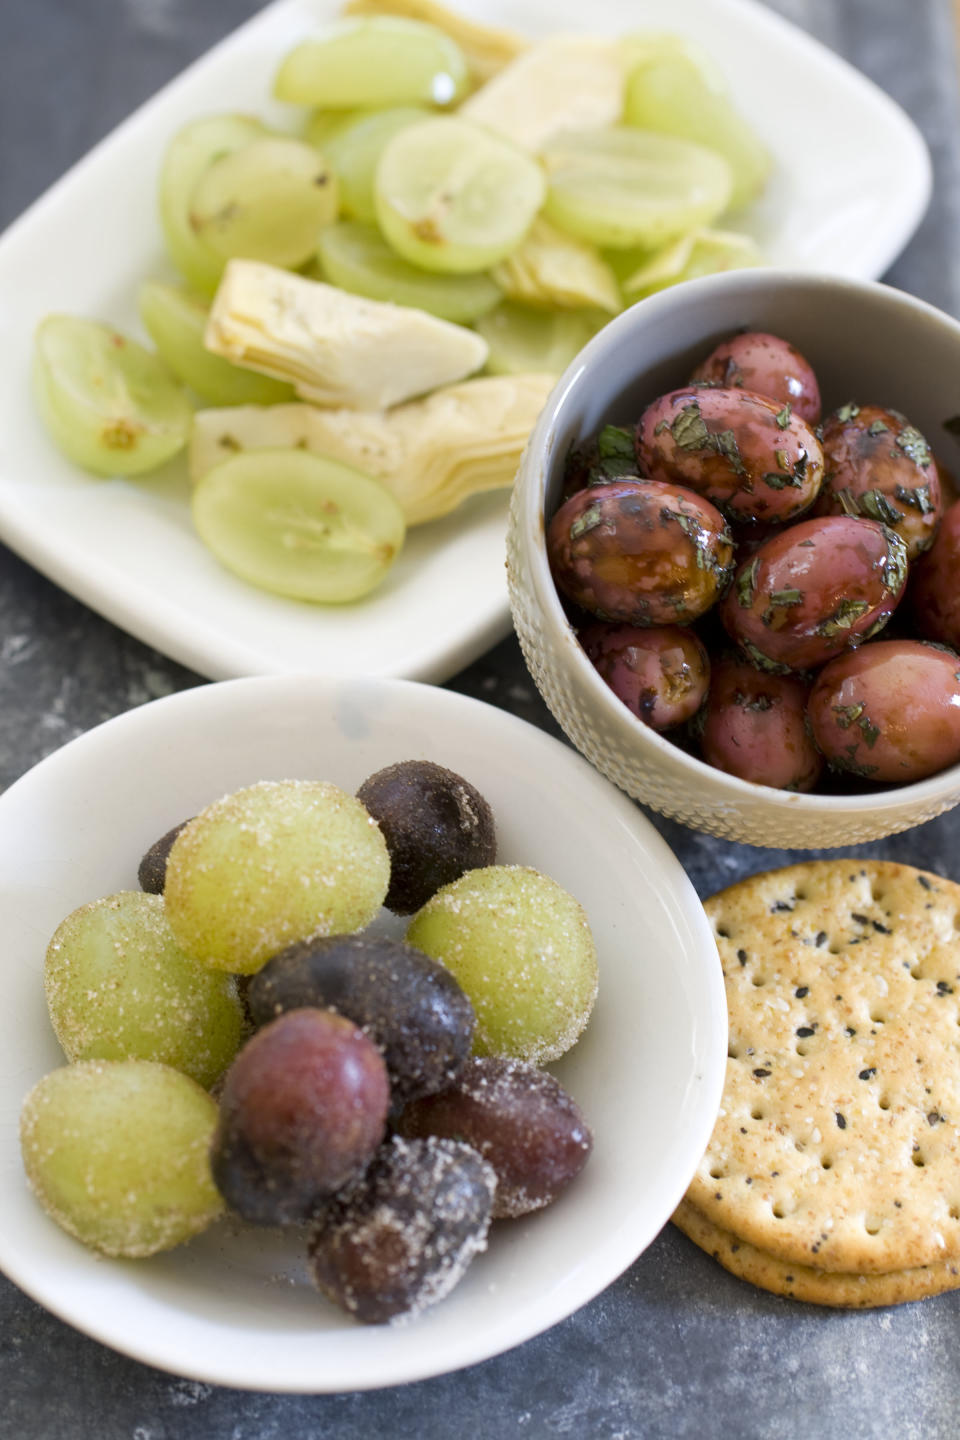 This Nov. 4, 2013 photo shows sugared grapes, marinated olives, and grapes with artichoke hearts in Concord, N.H. (AP Photo/Matthew Mead)